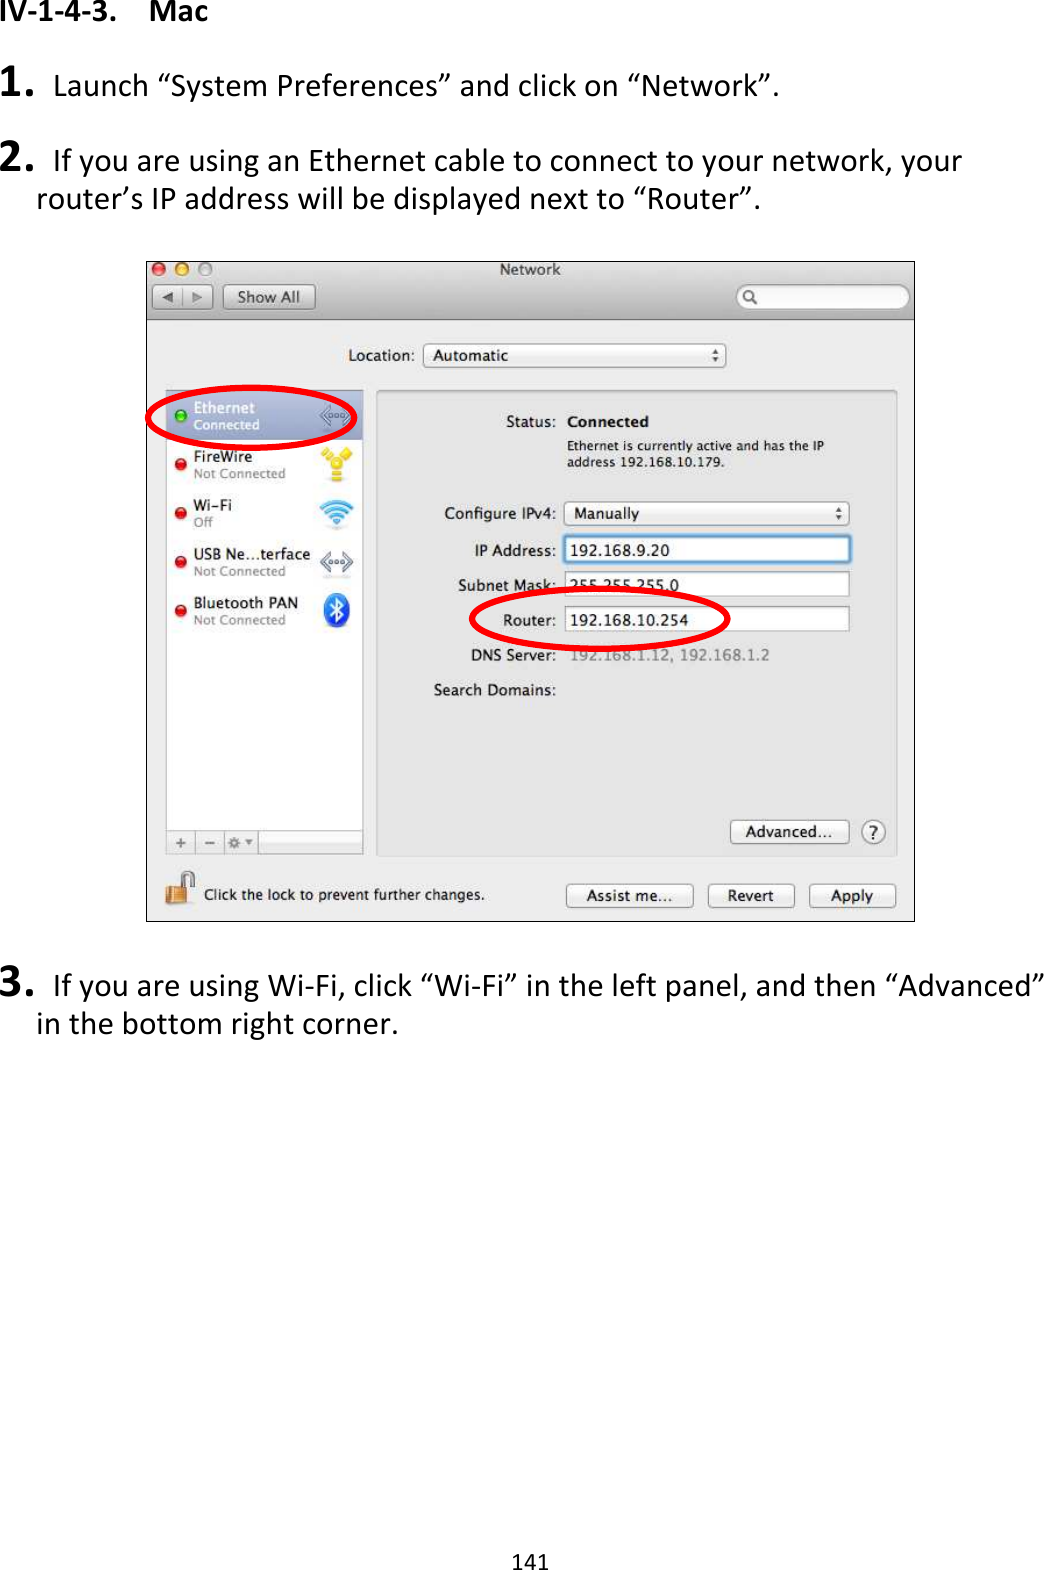 141 IV-1-4-3.  Mac  1.   Launch “System Preferences” and click on “Network”.  2.   If you are using an Ethernet cable to connect to your network, your router’s IP address will be displayed next to “Router”.    3.   If you are using Wi-Fi, click “Wi-Fi” in the left panel, and then “Advanced” in the bottom right corner.  